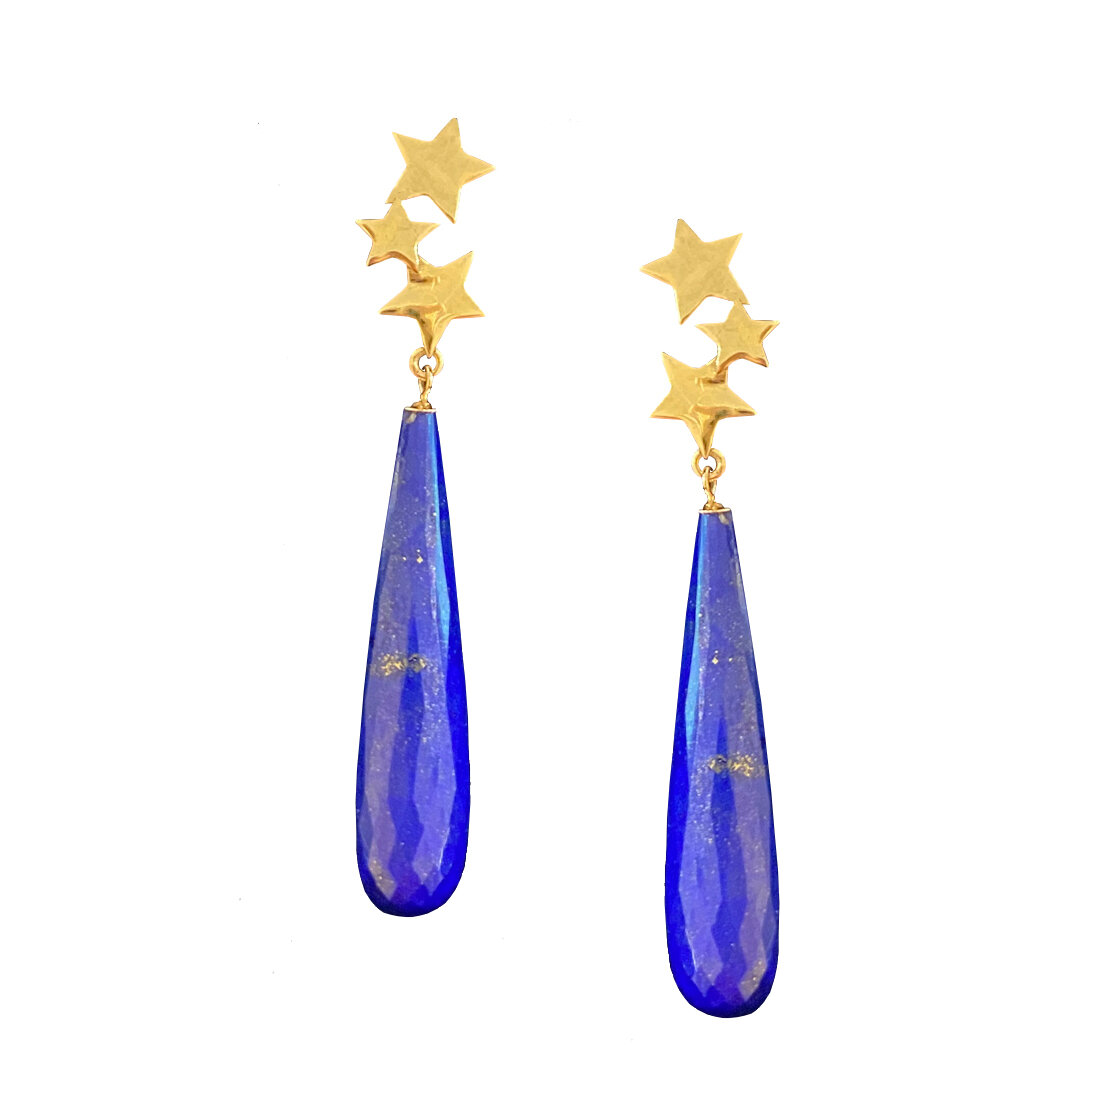 Stella Celestial Lapis Briolette Earrings with Gold Stars Limited Edition.jpg